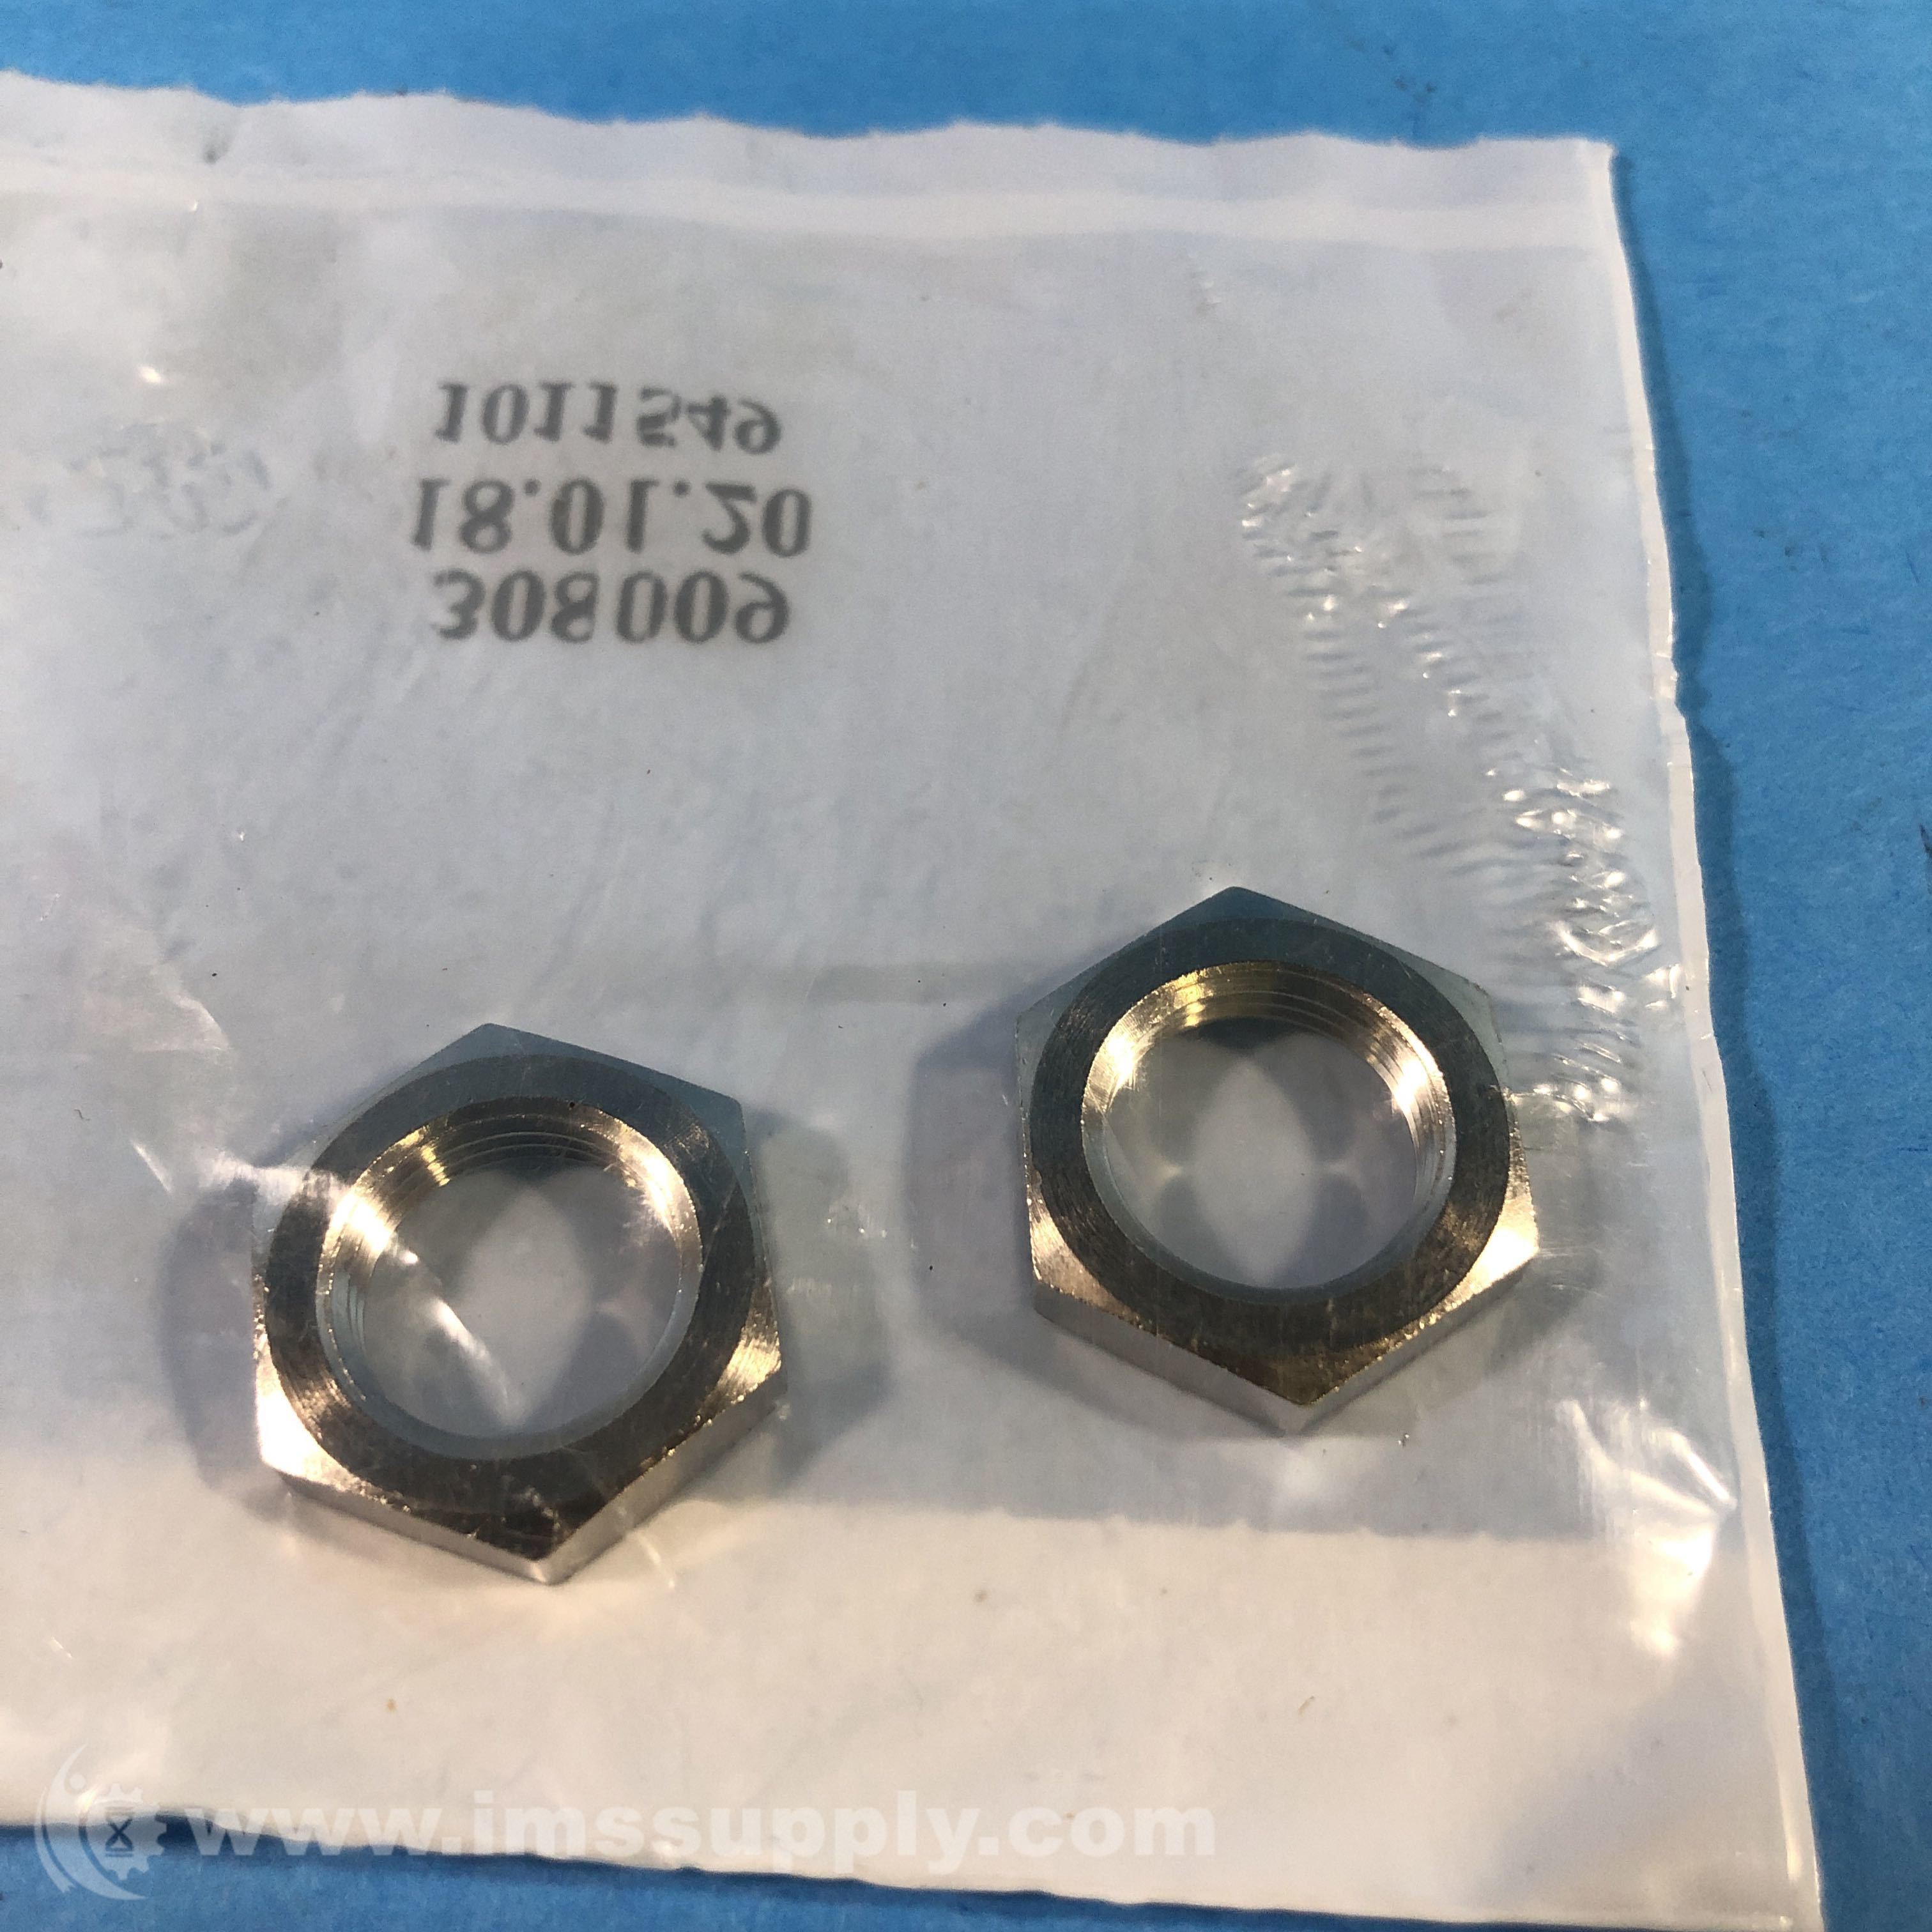 308009 Pack of 2 Hex Nuts, 1011549 - IMS Supply